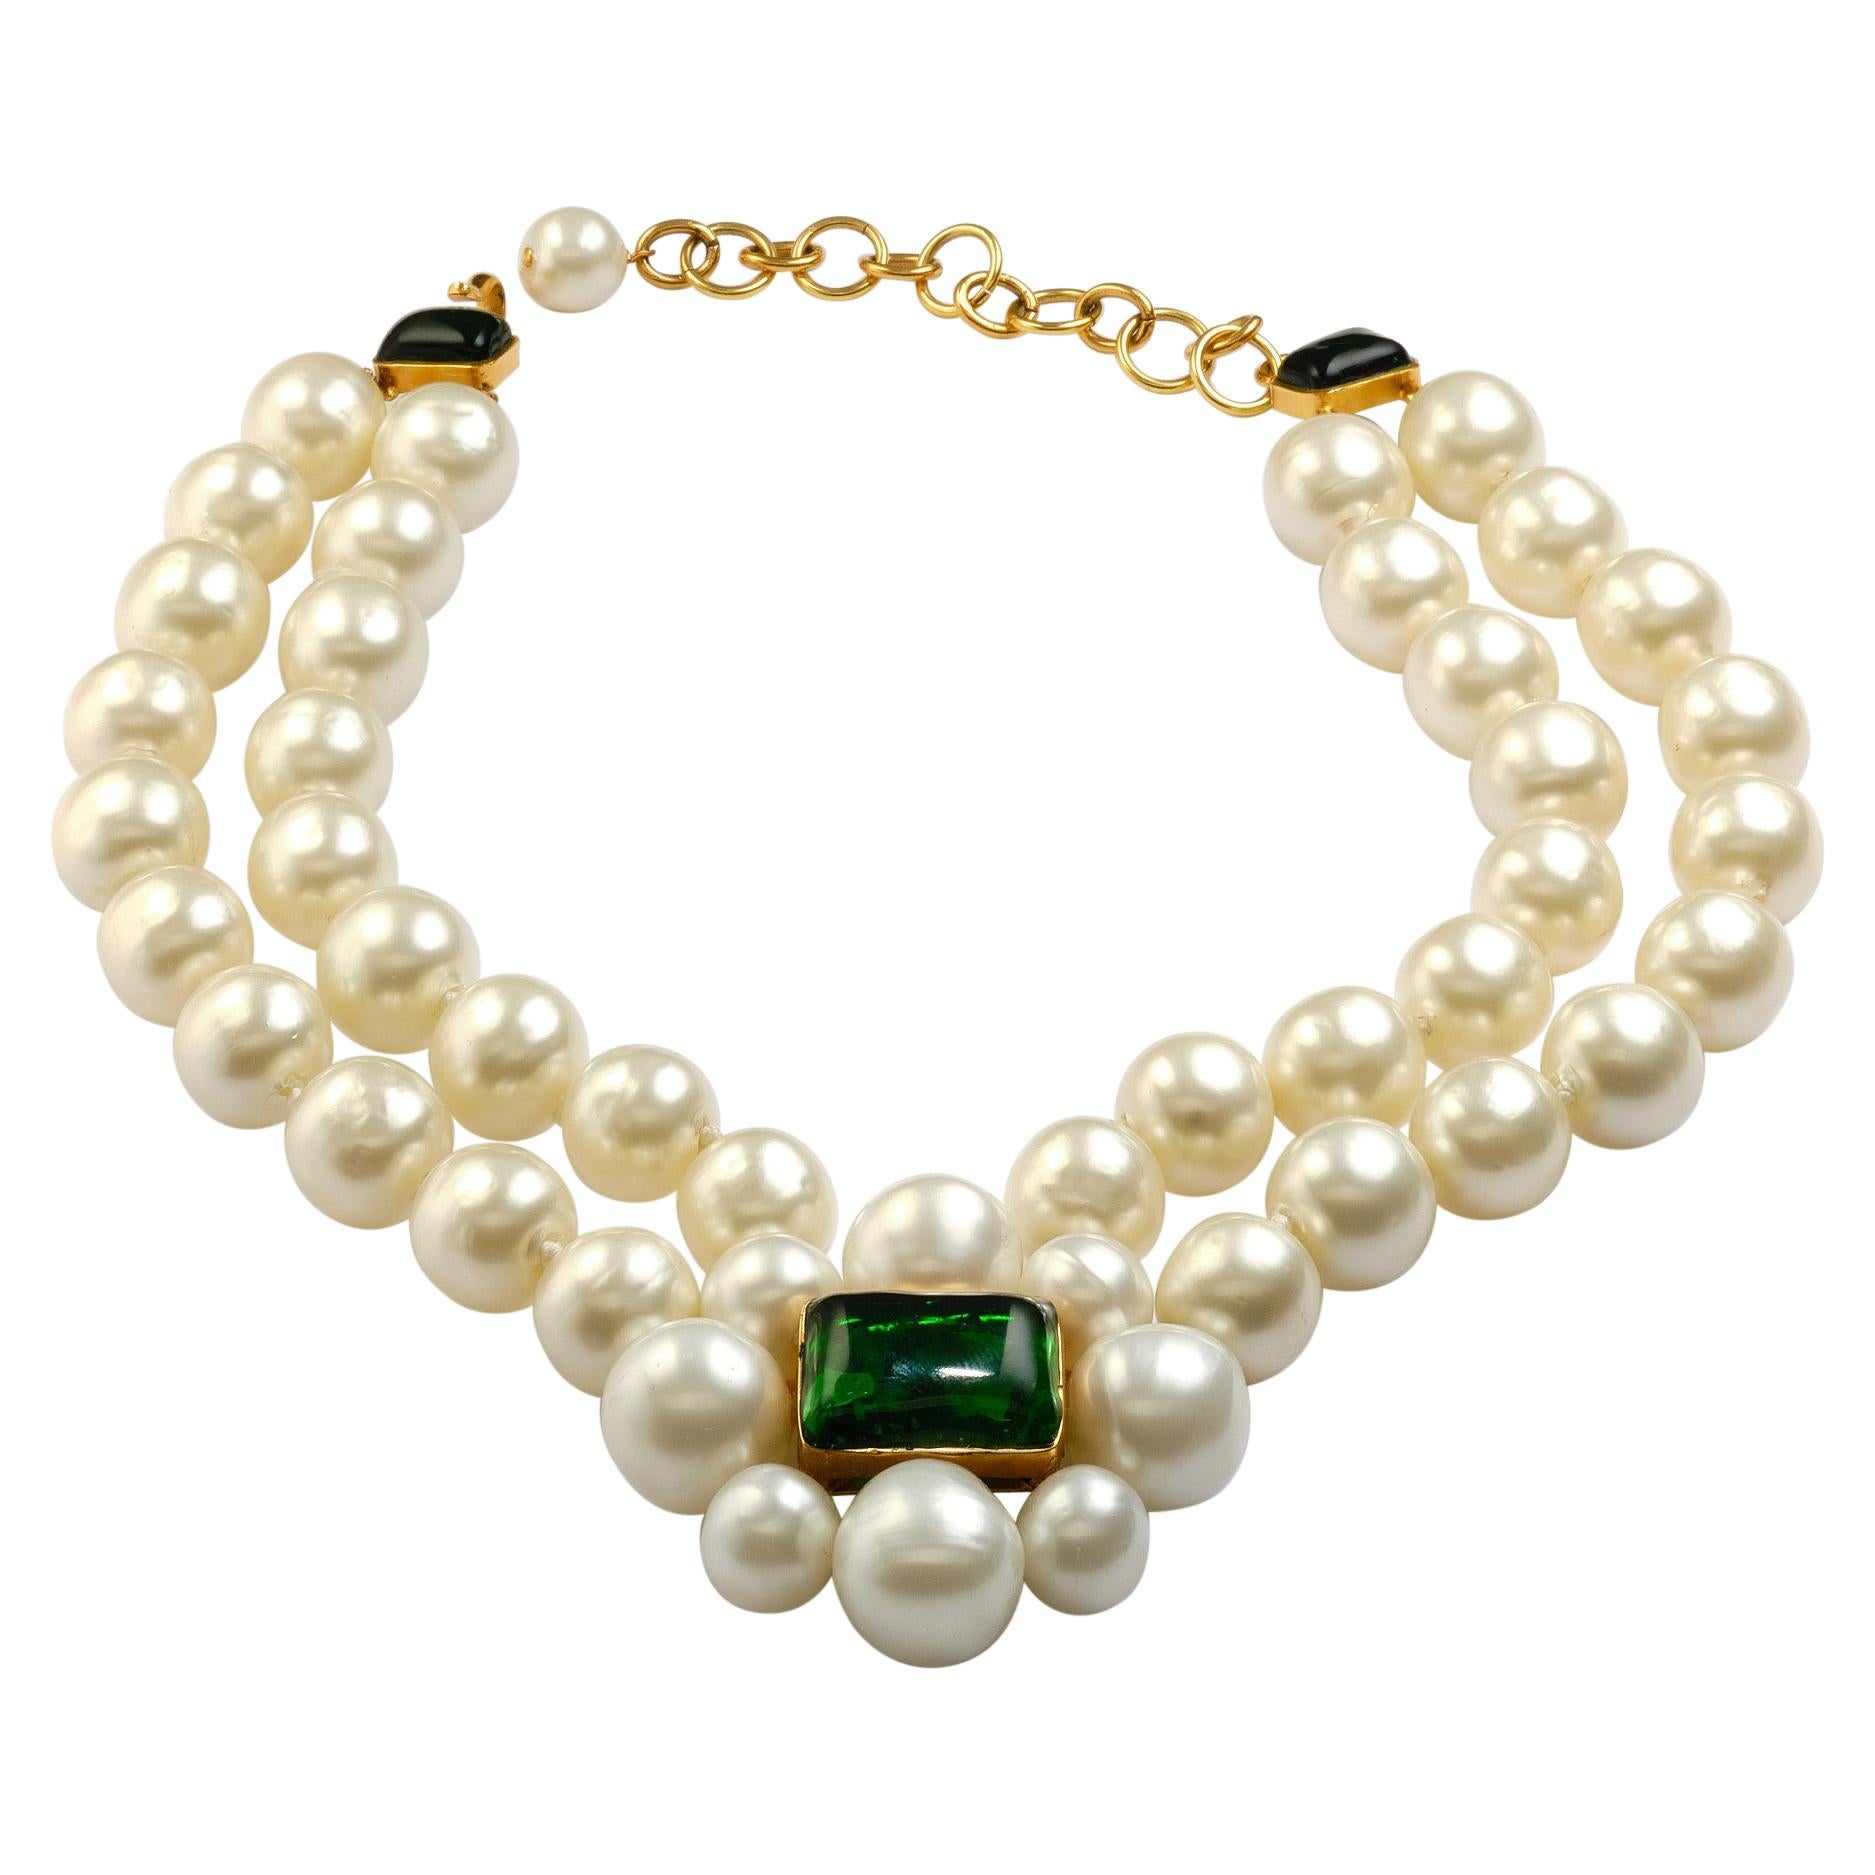 CHANEL collier with pearls and Gripoix signed 97A - 1997 Autumn